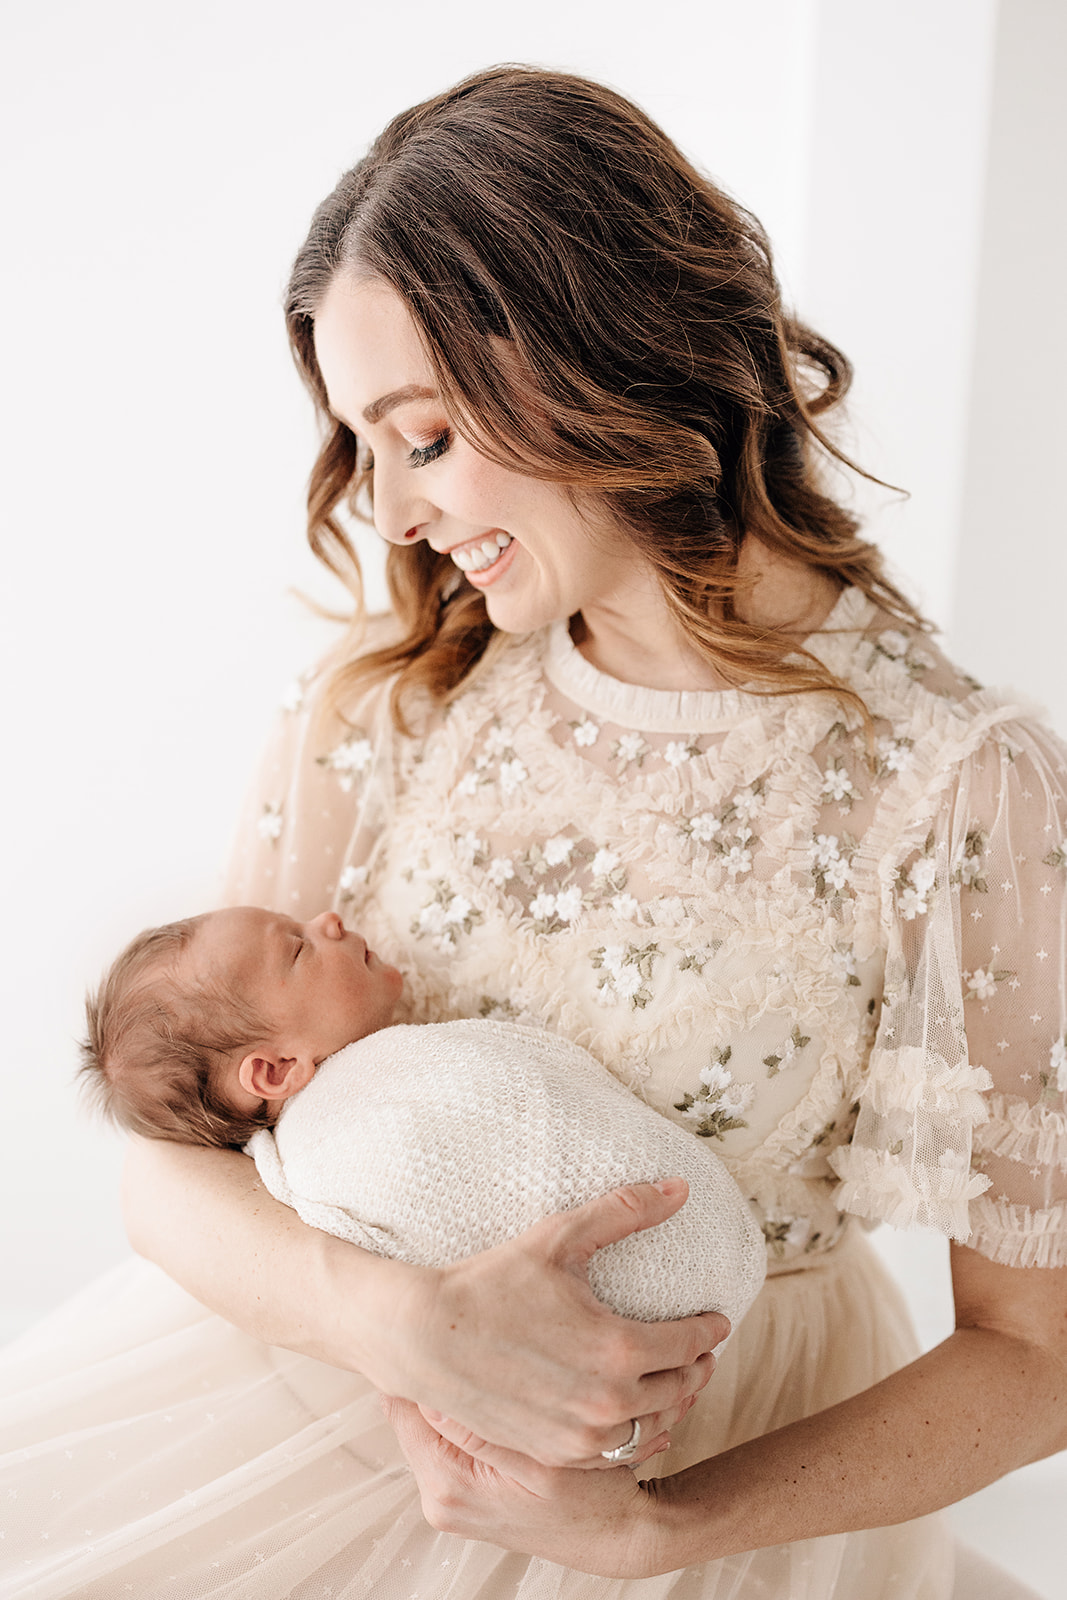 A smiling mom sits in a studio cradling her sleeping newborn in her arms